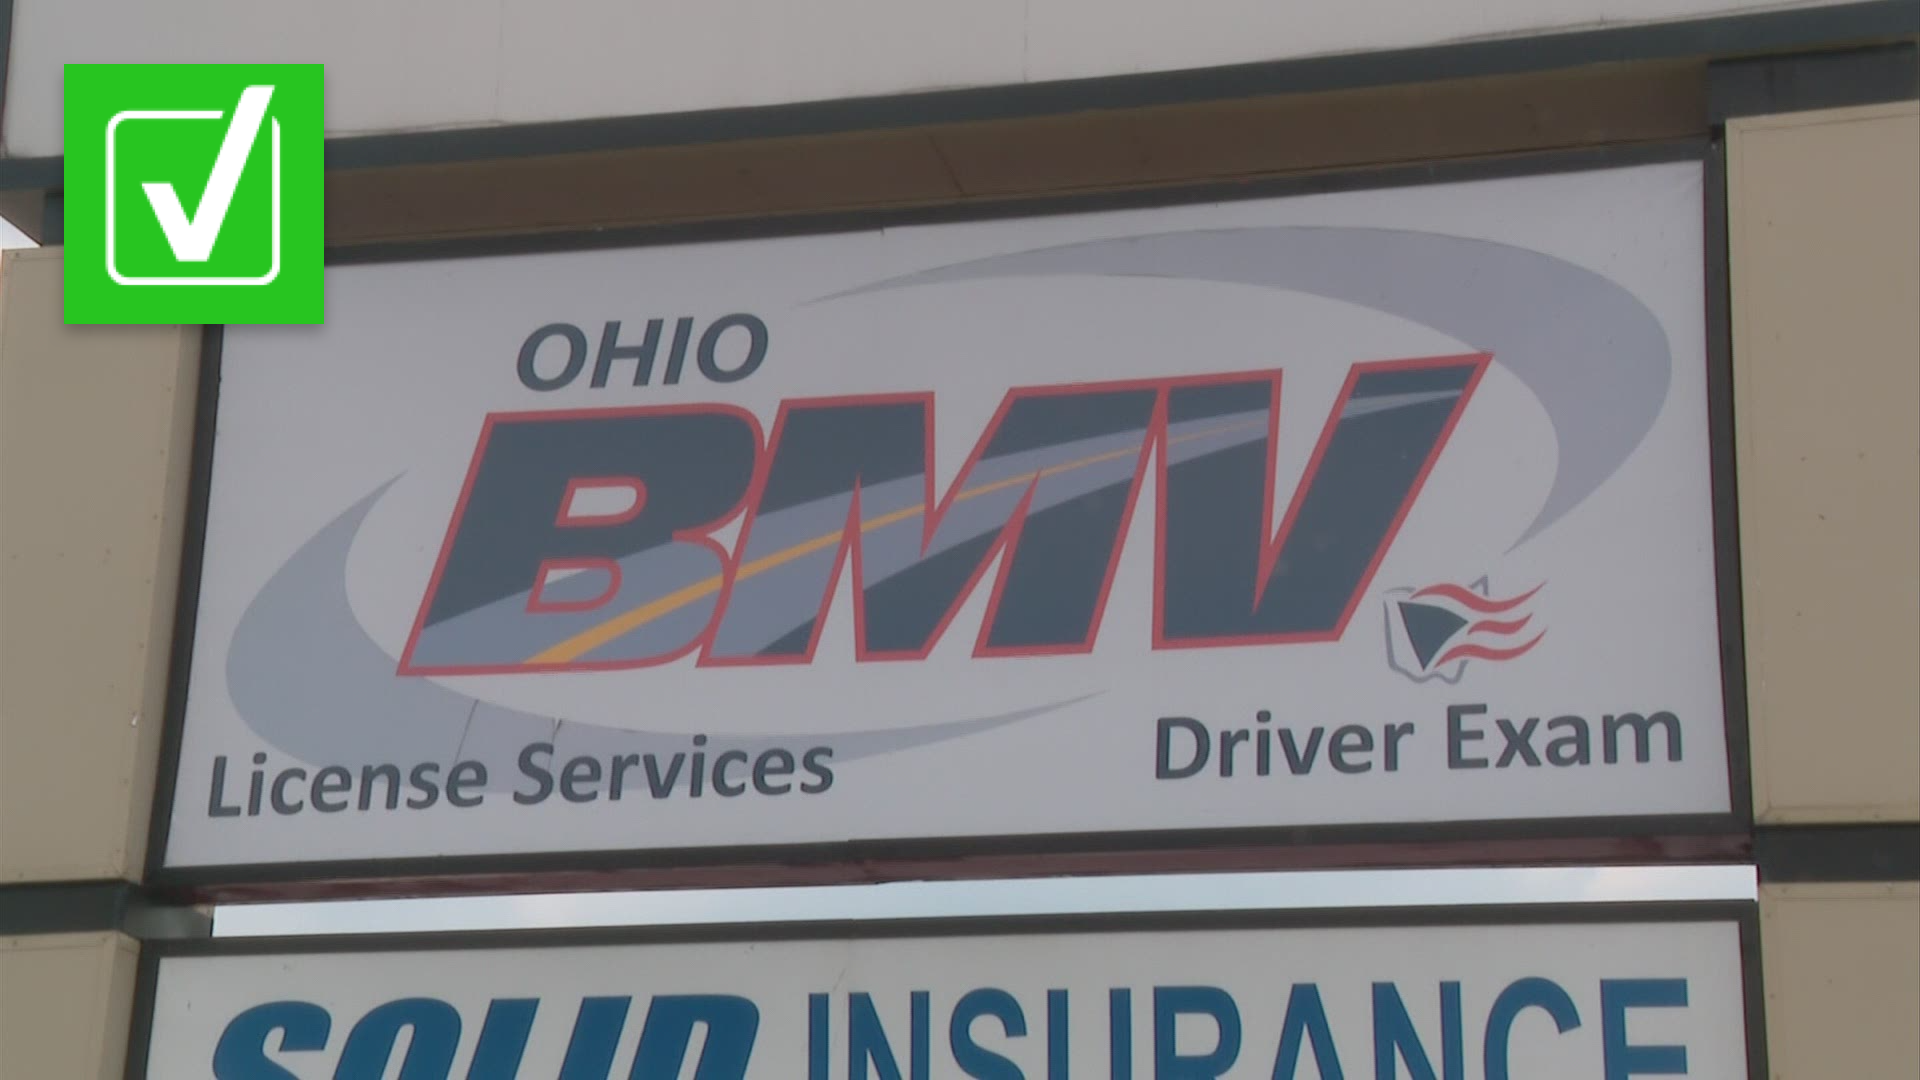 Starting June 27, you can now renew your driver's license through the Ohio BMV online. Here's a demonstration of how the process works.